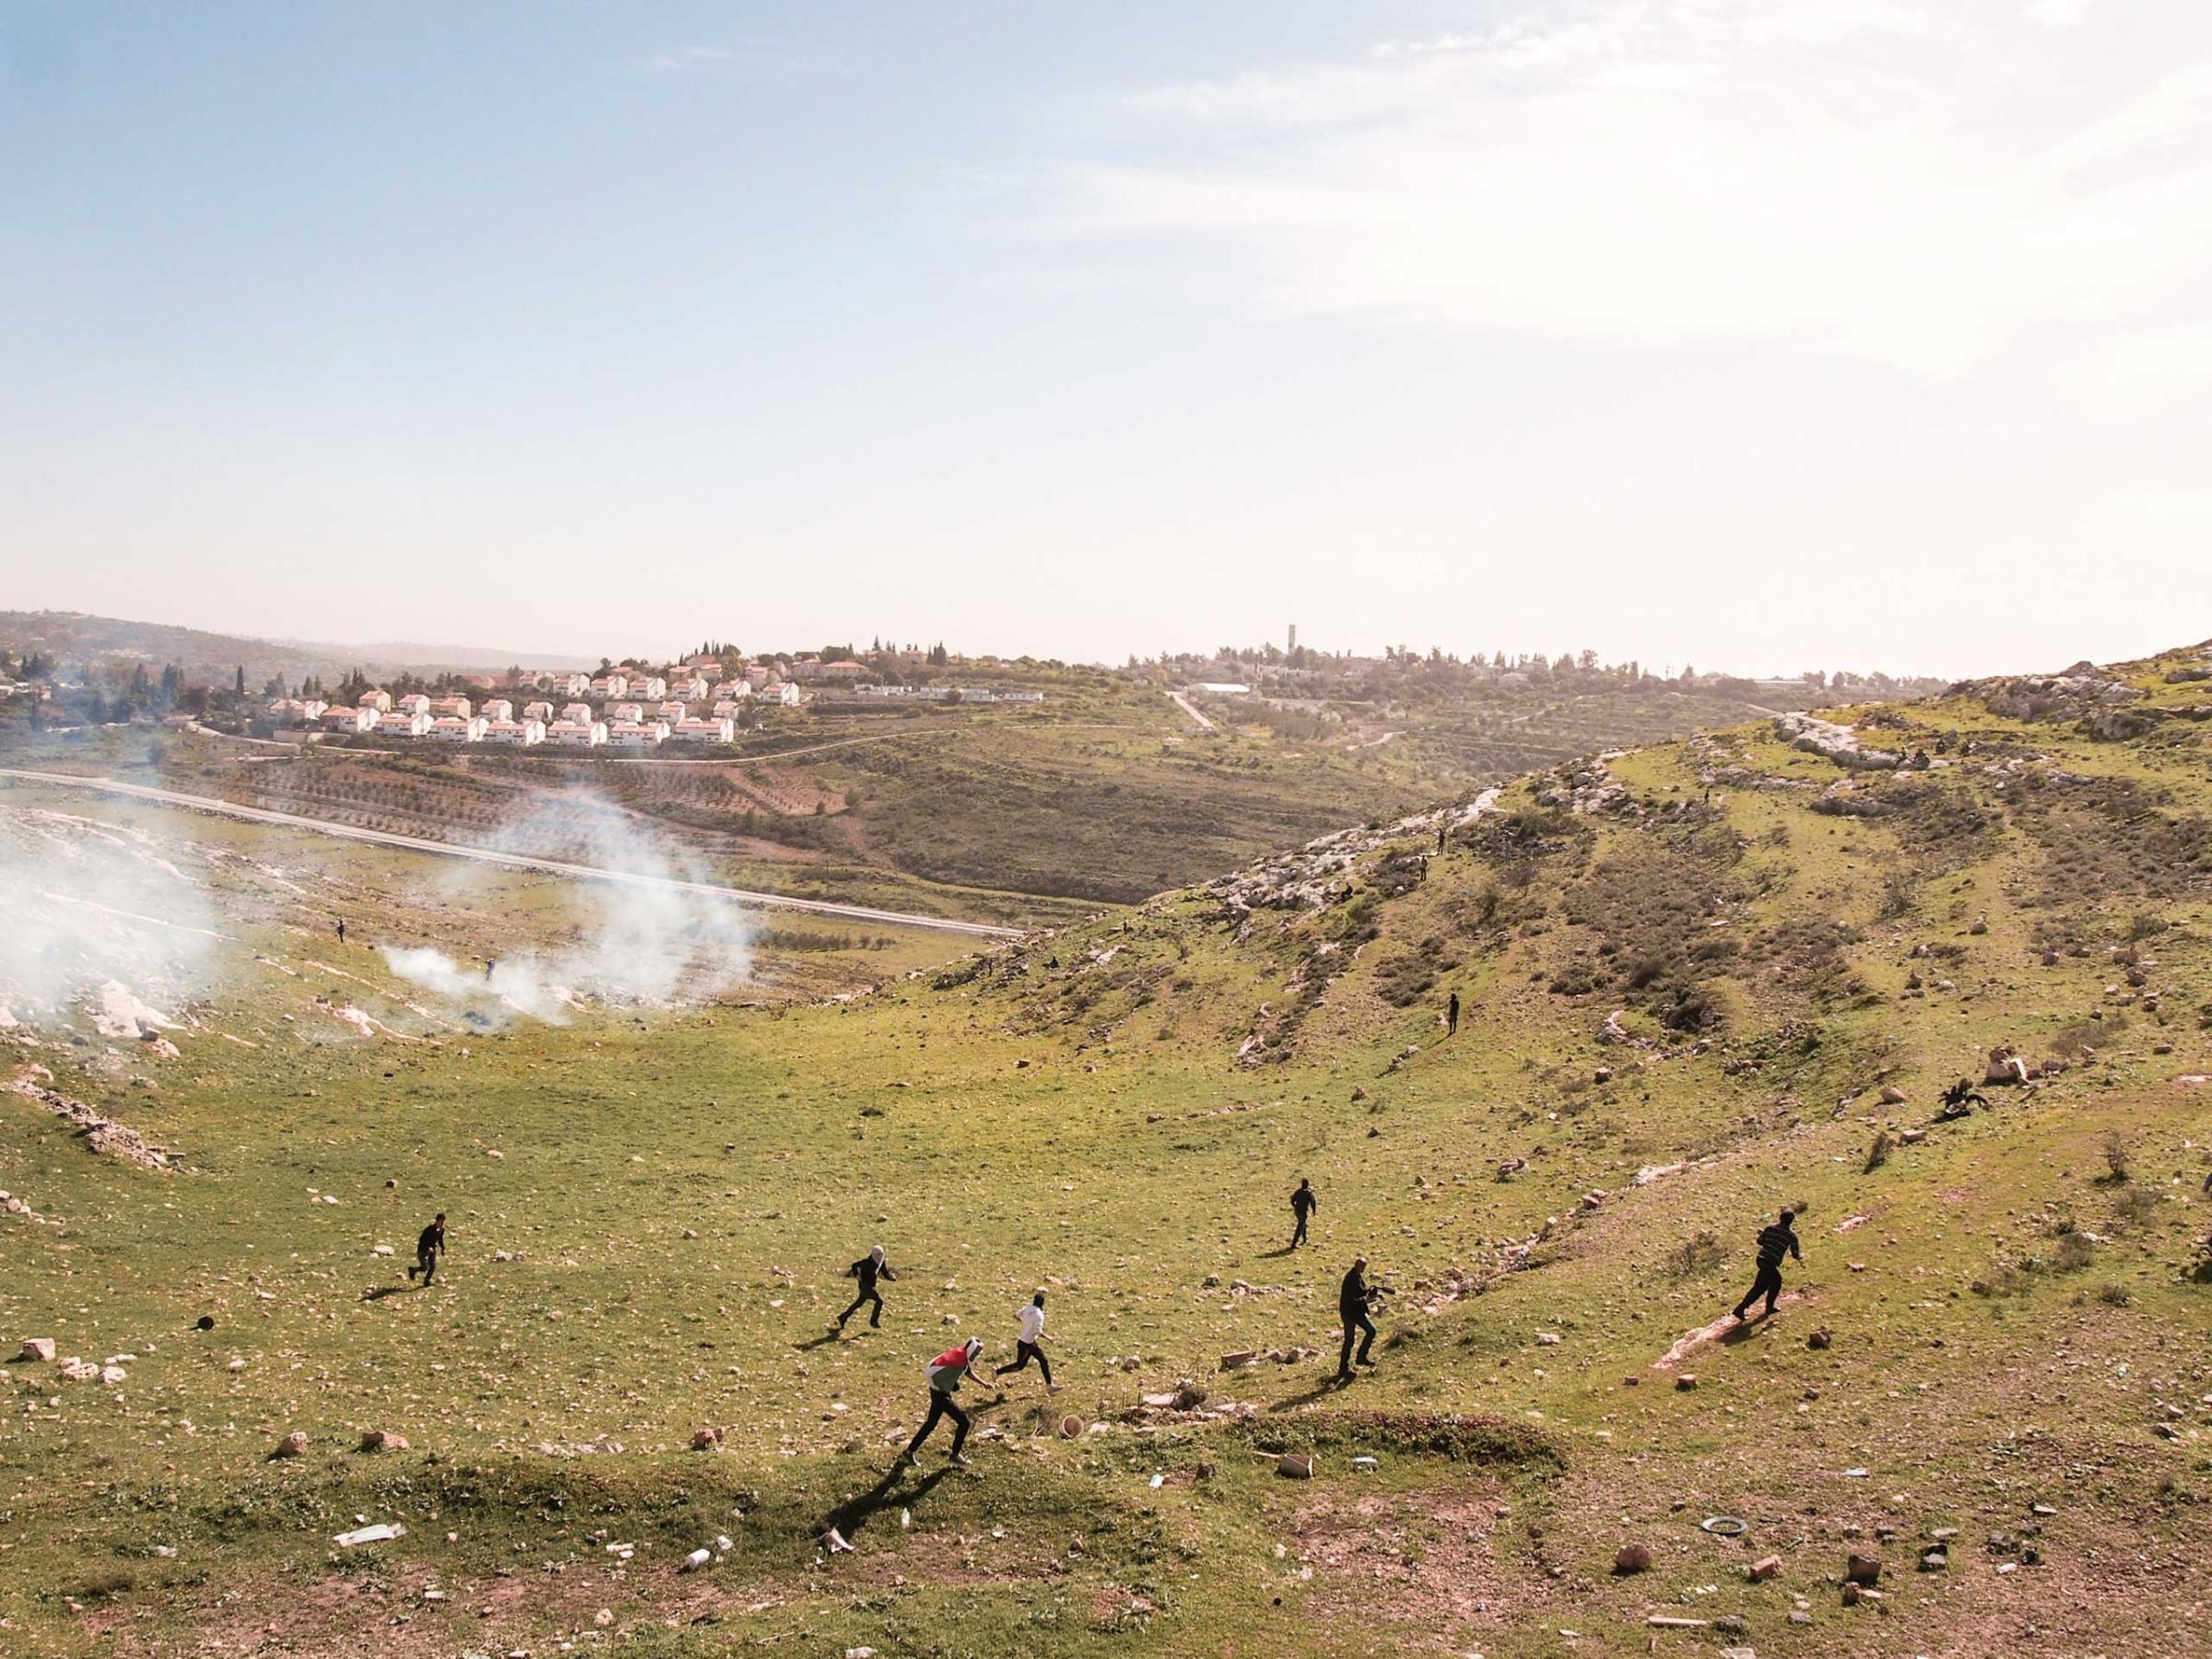 West Bank, Nabi Saleh. 2013. Protestors run away as Israeli soldiers fire tear gas at them. The Israeli settlement of Halimish is in the background.Residents of Nabi Saleh have been protesting the Israeli Occupation every Friday after midday prayers since 2009. The protests started after Israelis from the nearby settlement of Halimish took over a small spring that had been on Palestinian land. After widening and adding a bench to the spring, the settlers refused to allow the Palestinians to continue using it. The weekly protests quickly devolve into rock throwing by the Palestinians and tear gas, rubber bullets, and 'skunk' (a spray mixed with water that has a horrific stench that can linger for weeks) in response by the Israelis. (Peter van Agtmael / Magnum Photos)